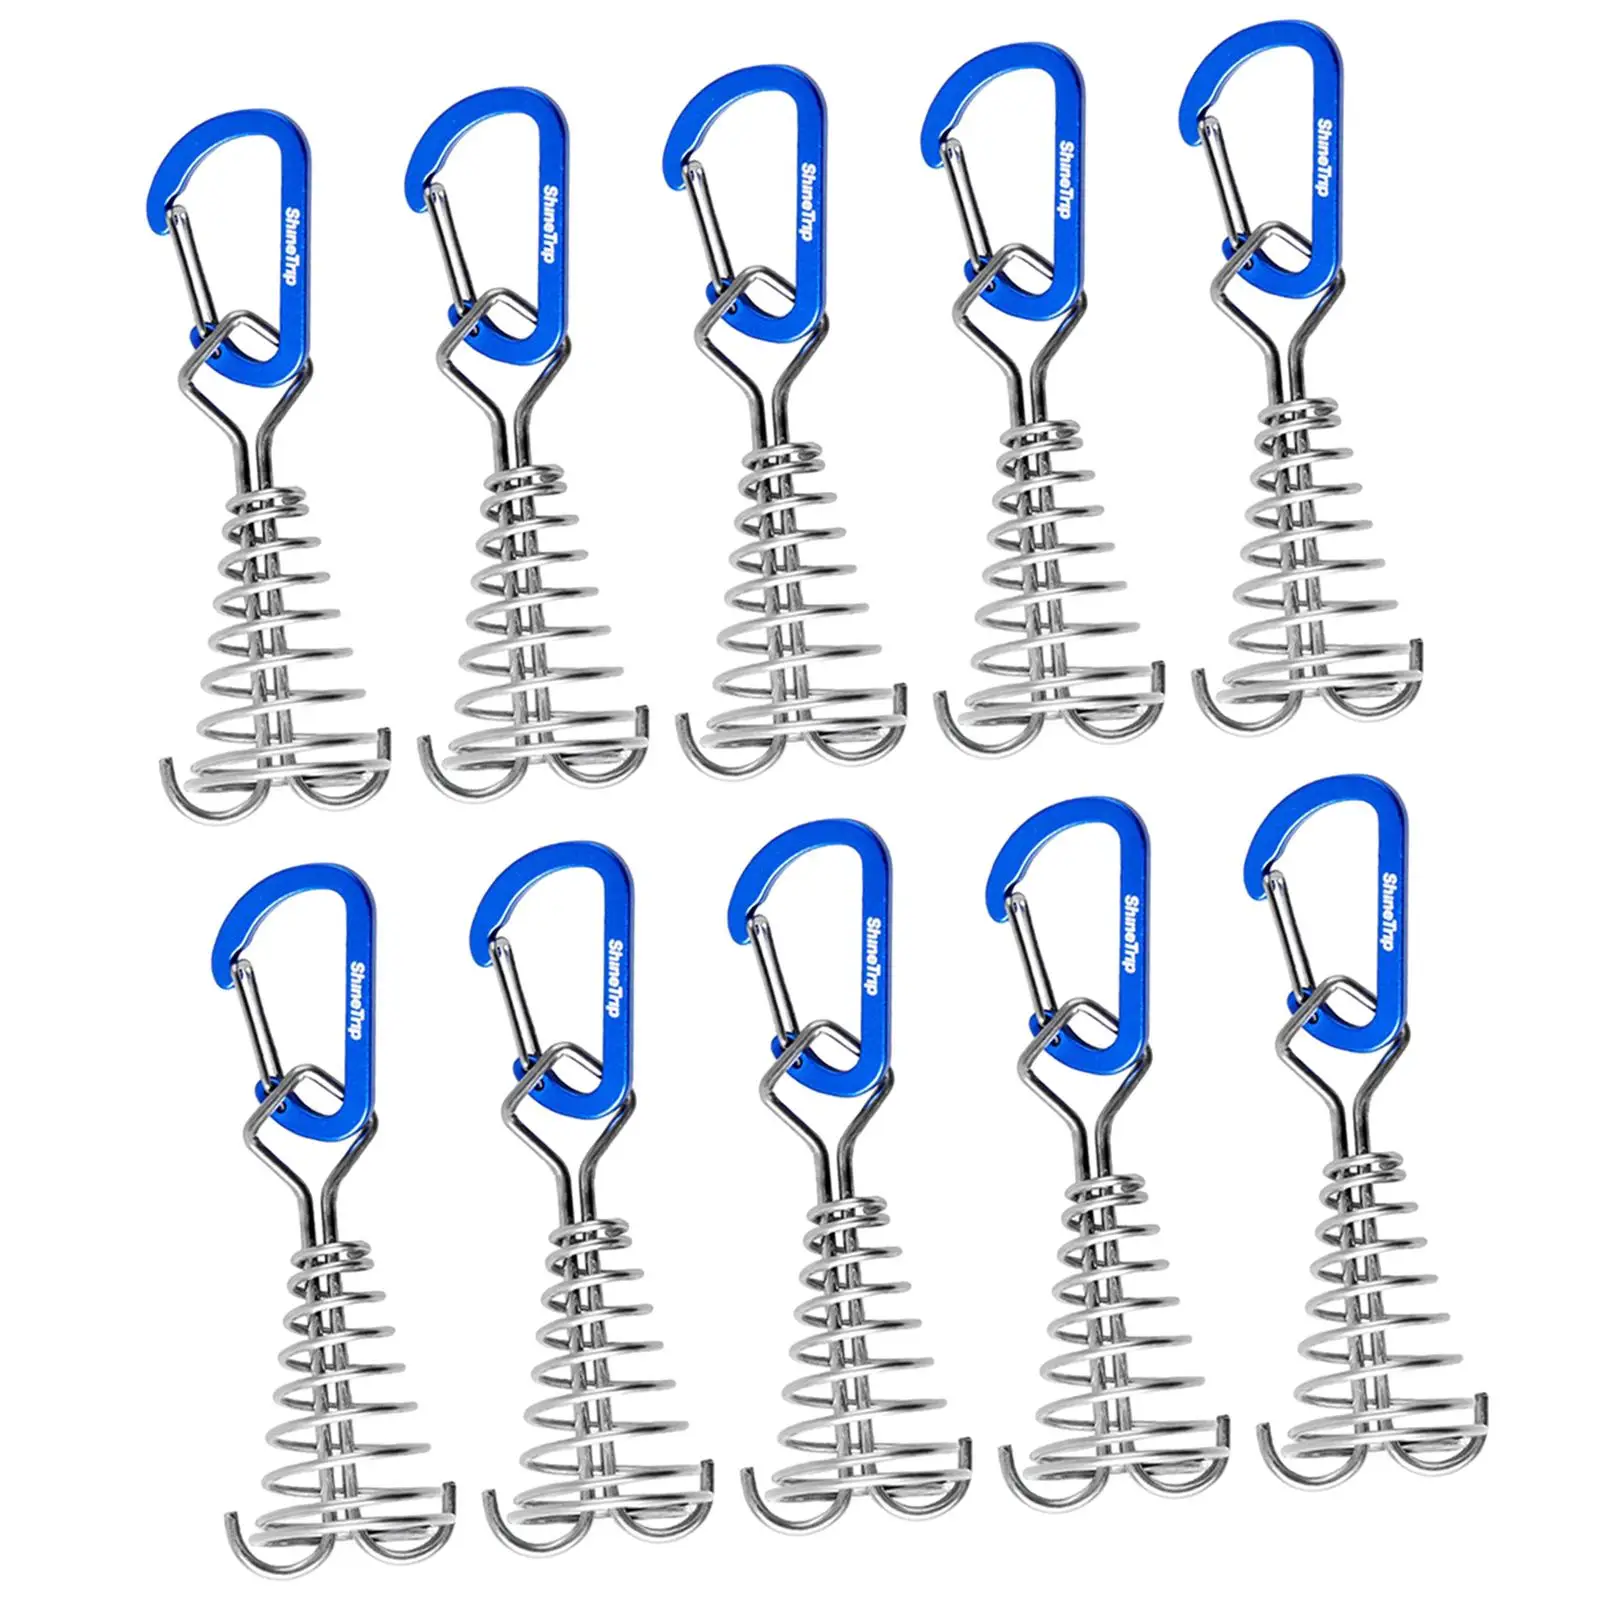 10x Deck Anchor Pegs with Carabiners, Windproof Tent Rope Tightener, Deck Tie Down Tent Stakes for Wood Platform Accessories